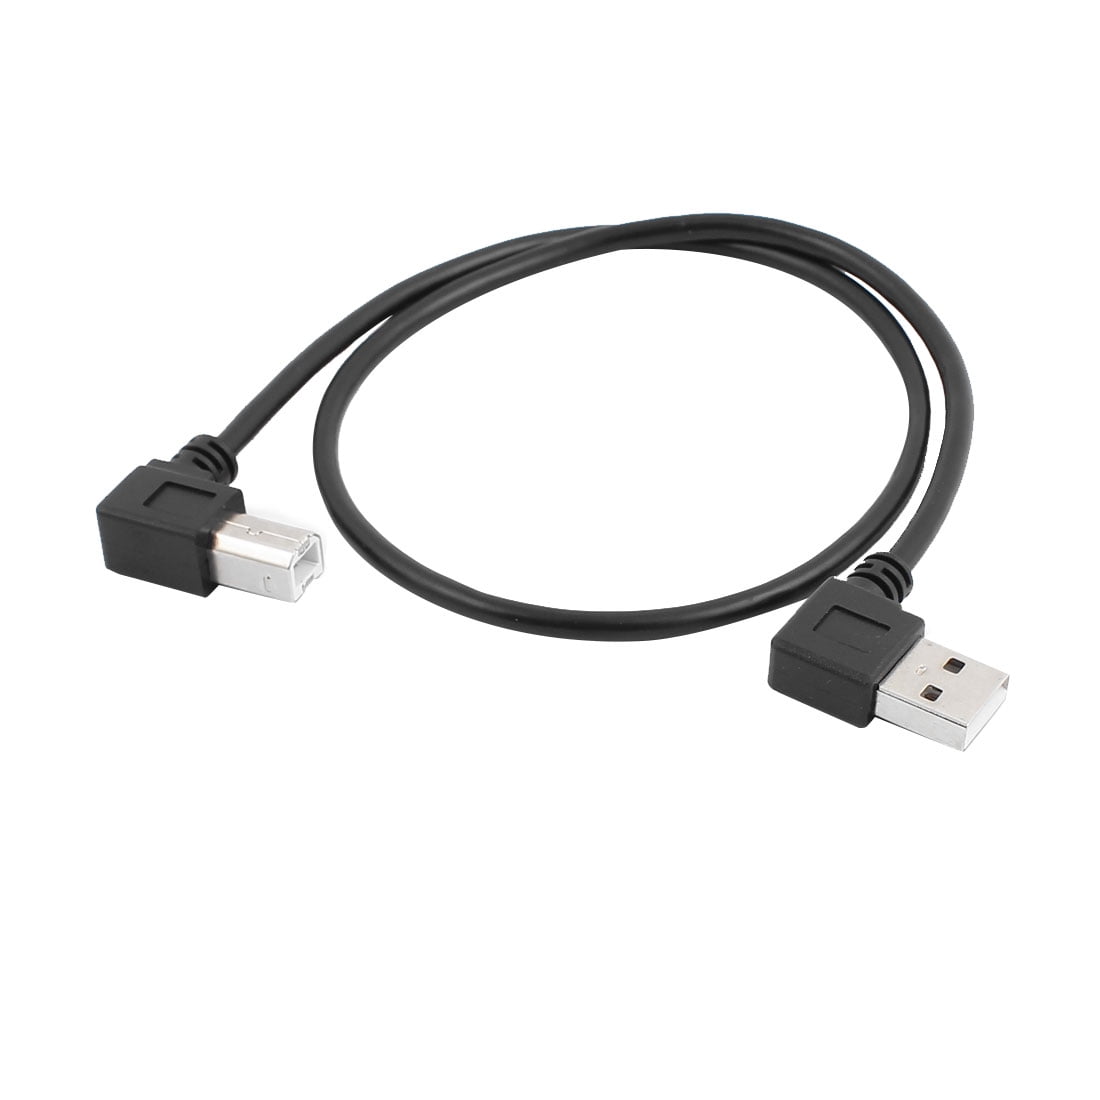 Usb A 2.0 right angle male to micro usb left angled 90 degree cable cord 50CM 